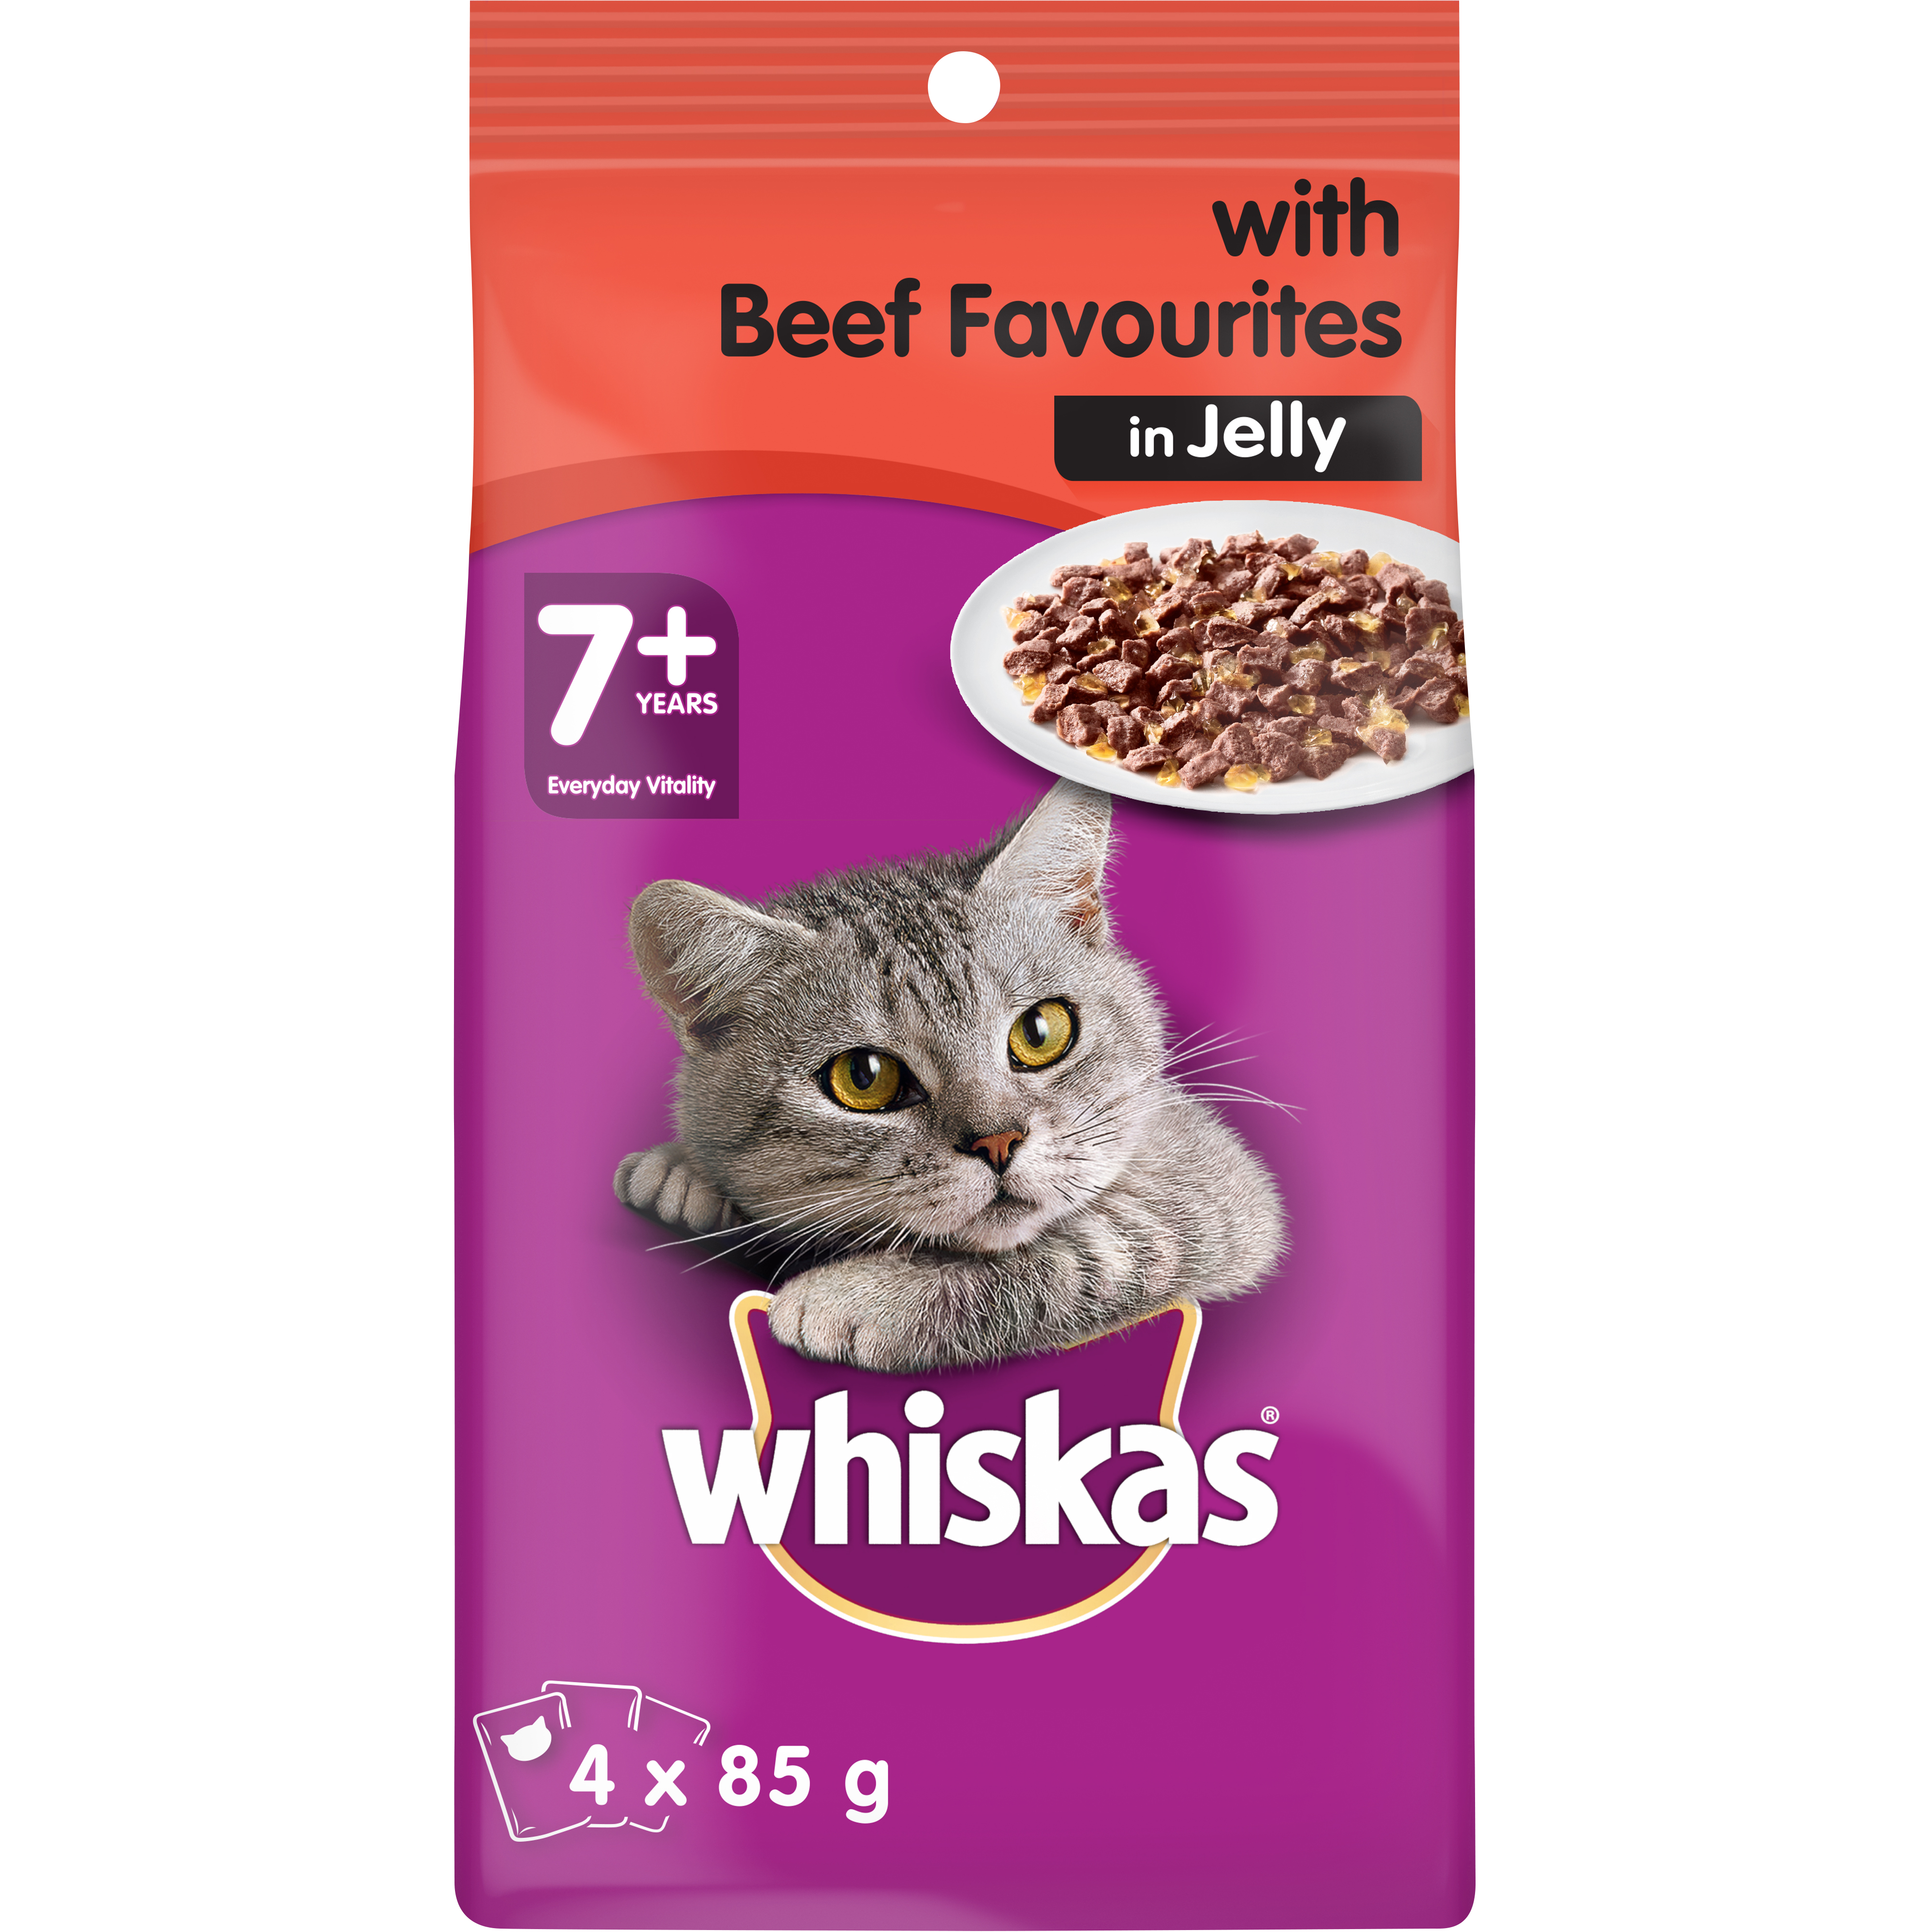 WHISKAS® Senior Wet Cat Food With Beef Favourites In Jelly 4 x 85g Pouches image